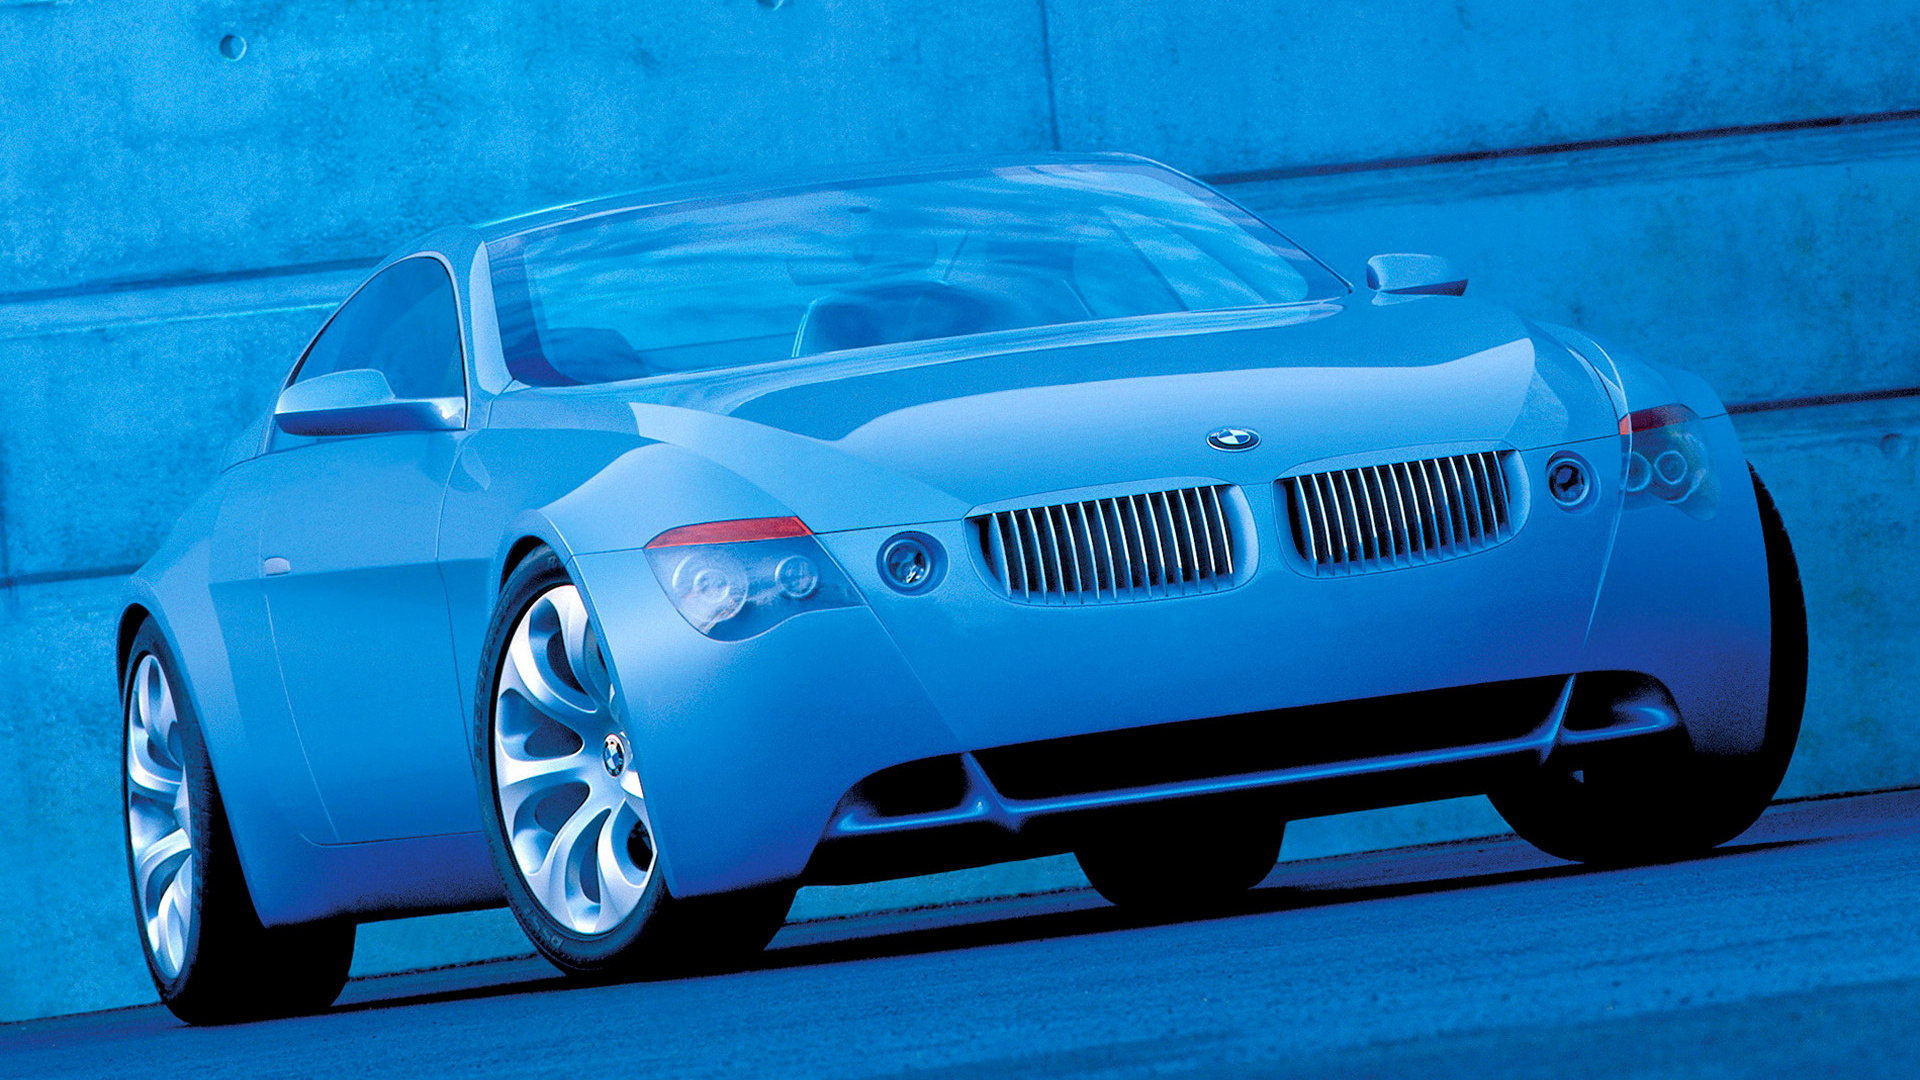 1999 BMW Z9 Gran Turismo Concept Wallpapers and HD